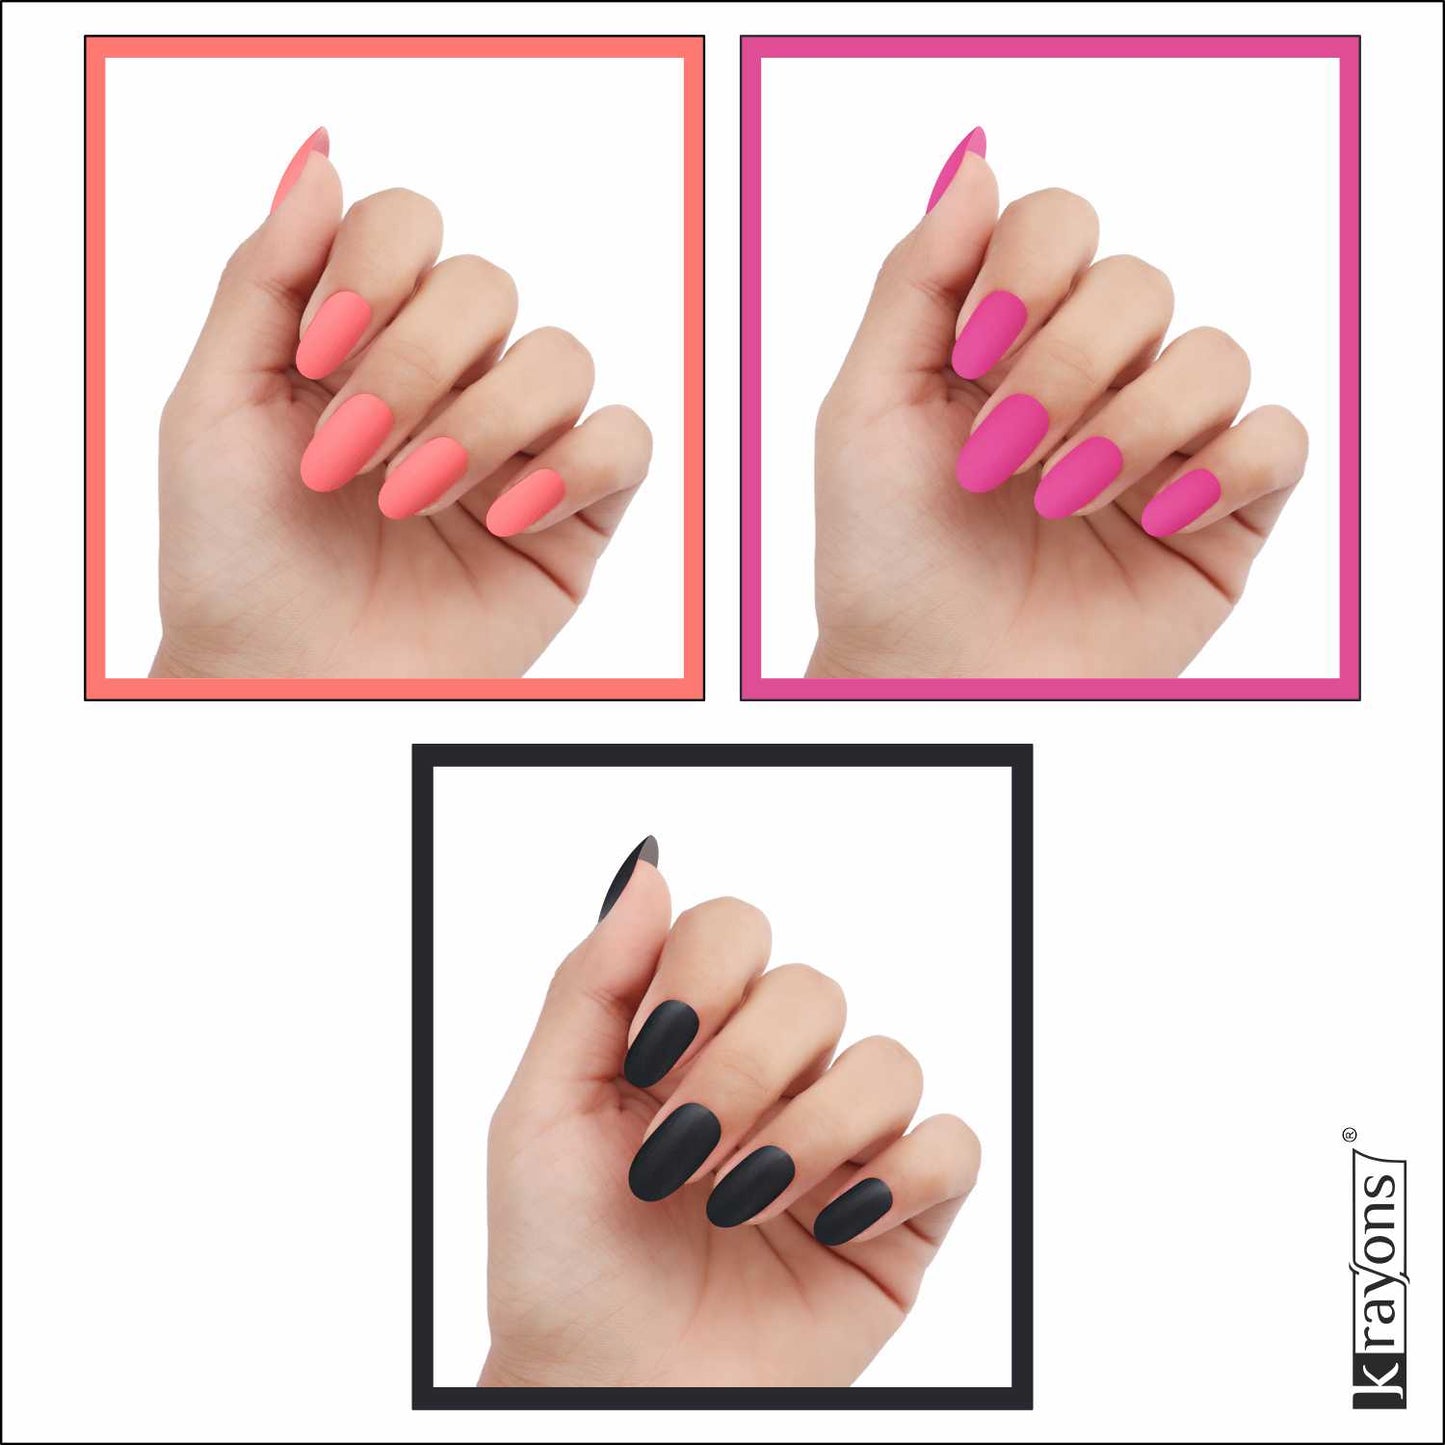 Krayons Cute Super Matte Finish Nail Enamel, Quick Dry, LongLasting, Blossom Peach, Hot Pink, Black Magnet, 6ml Each (Pack of 3)